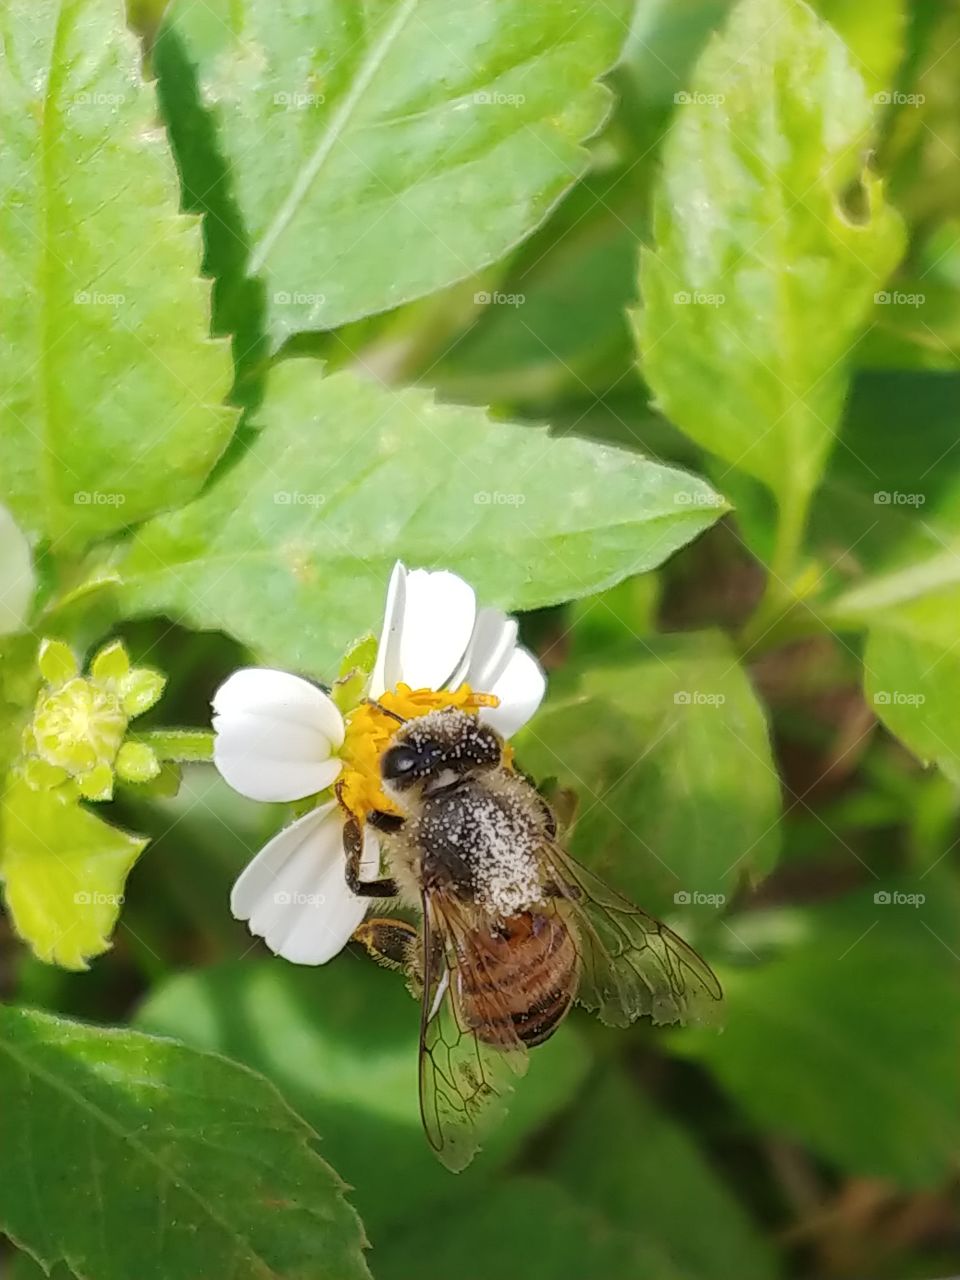 Close-up of honey bee with pollen sprinkled on his back sitting on a small white and yellow flower with green and yellpw leaves in the background.